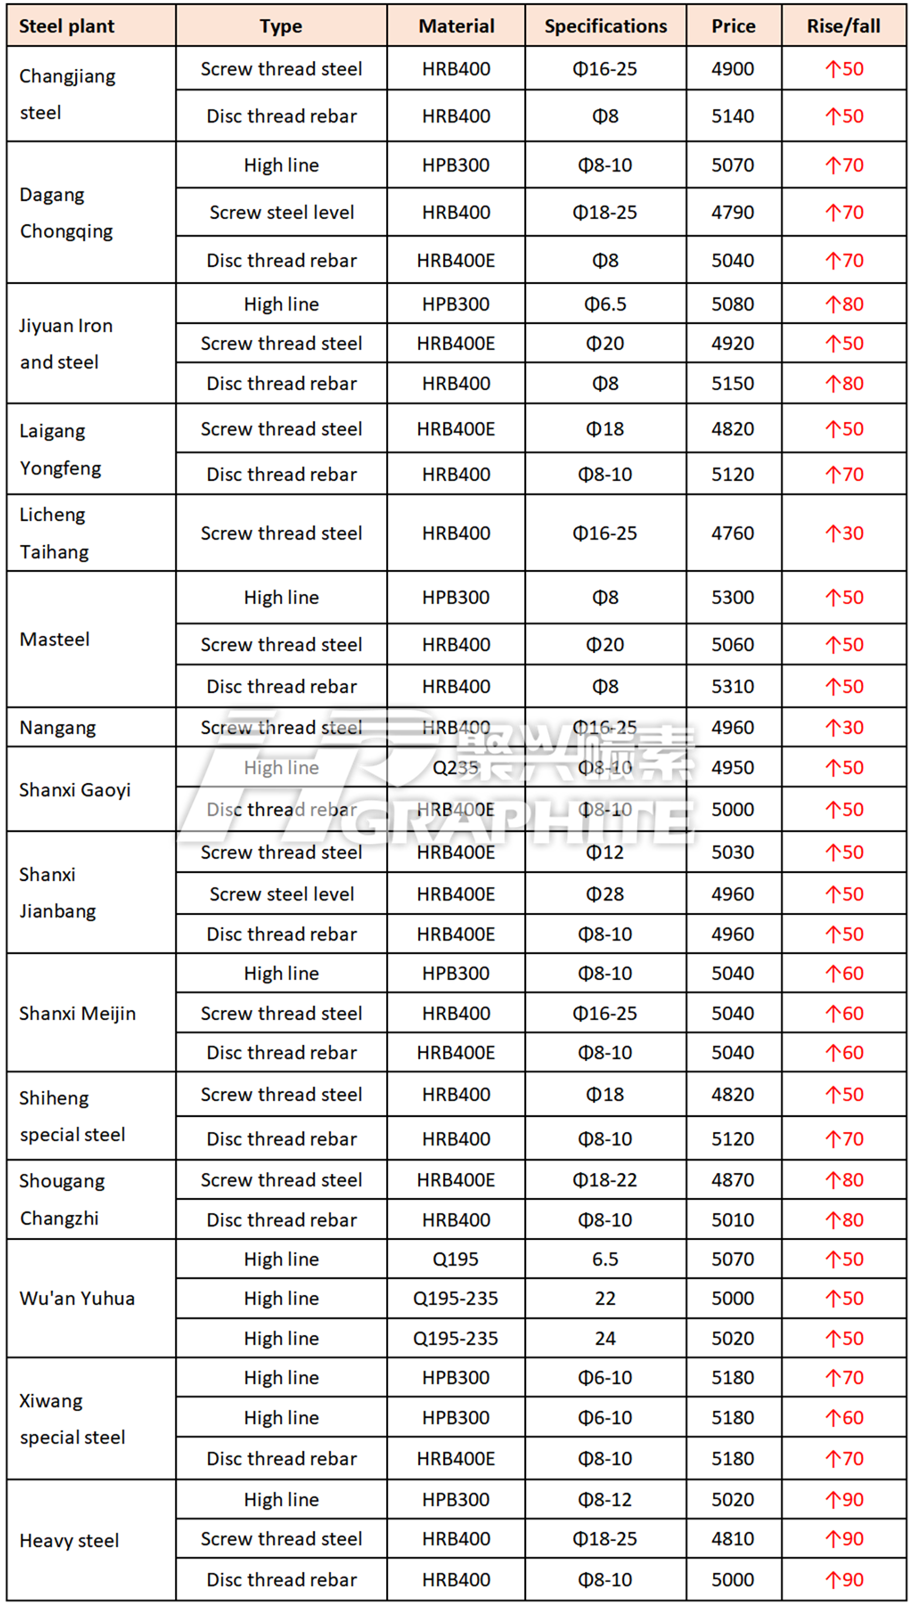 China's 15 steel plants construction steel ex-factory price table.png